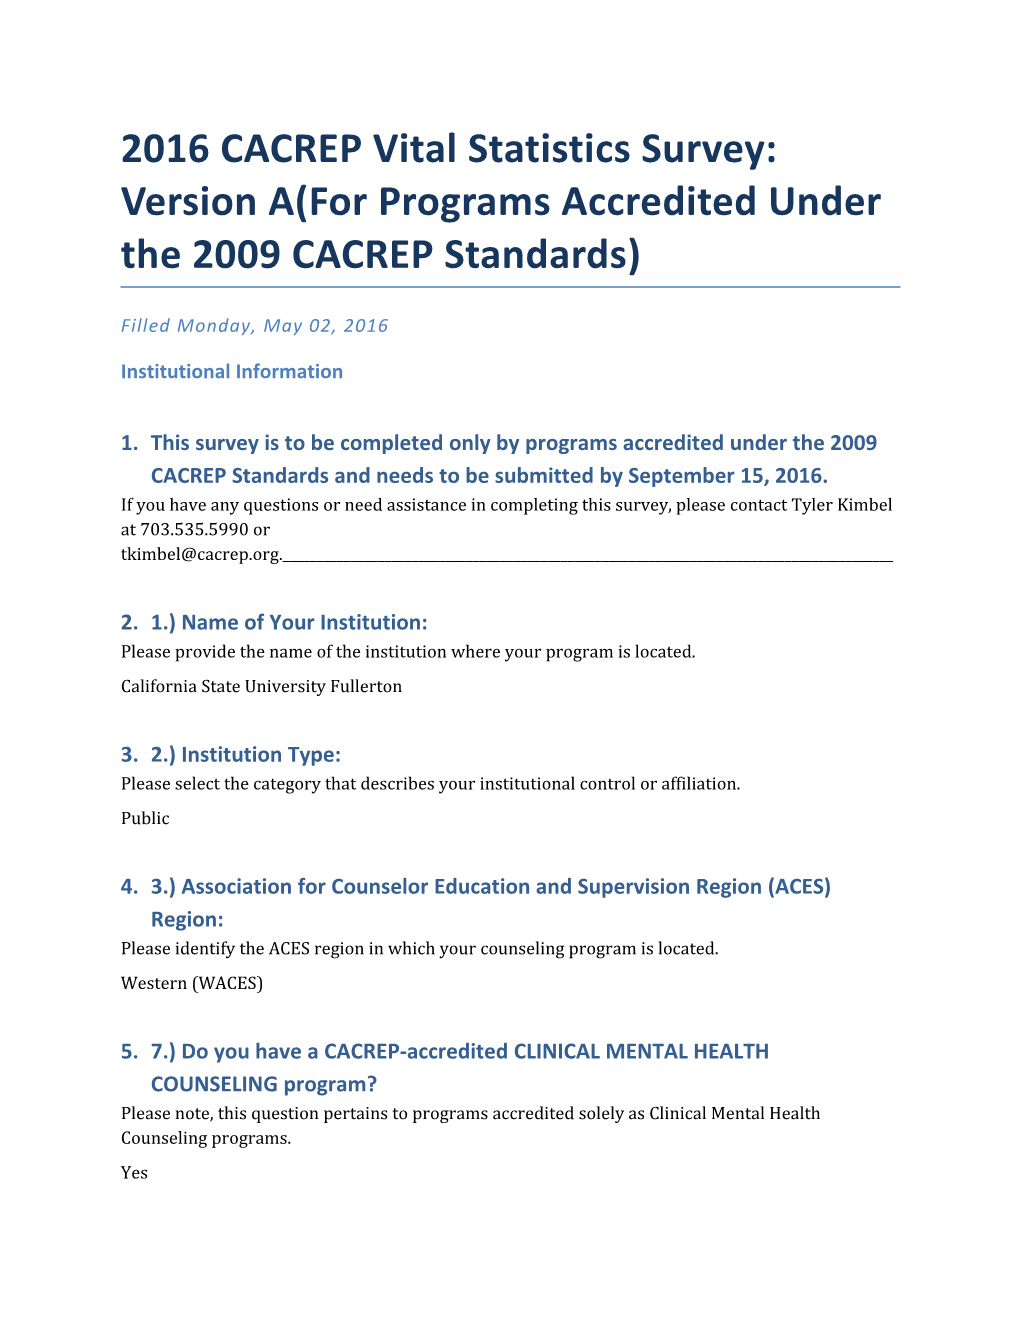 2016 CACREP Vital Statistics Survey: Version A(For Programs Accredited Under the 2009 CACREP